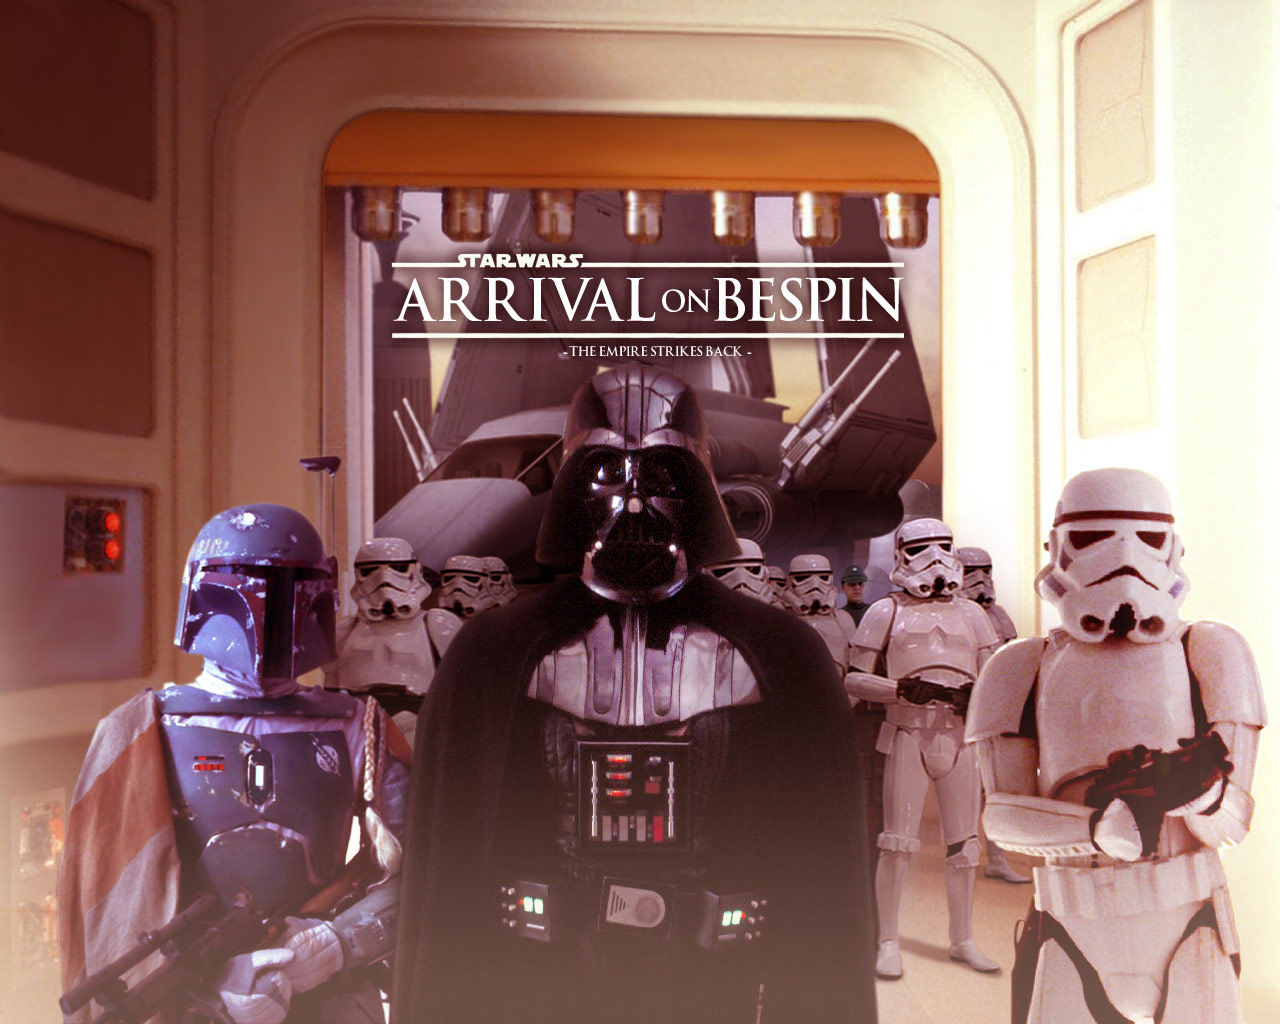 Arrival on Bespin